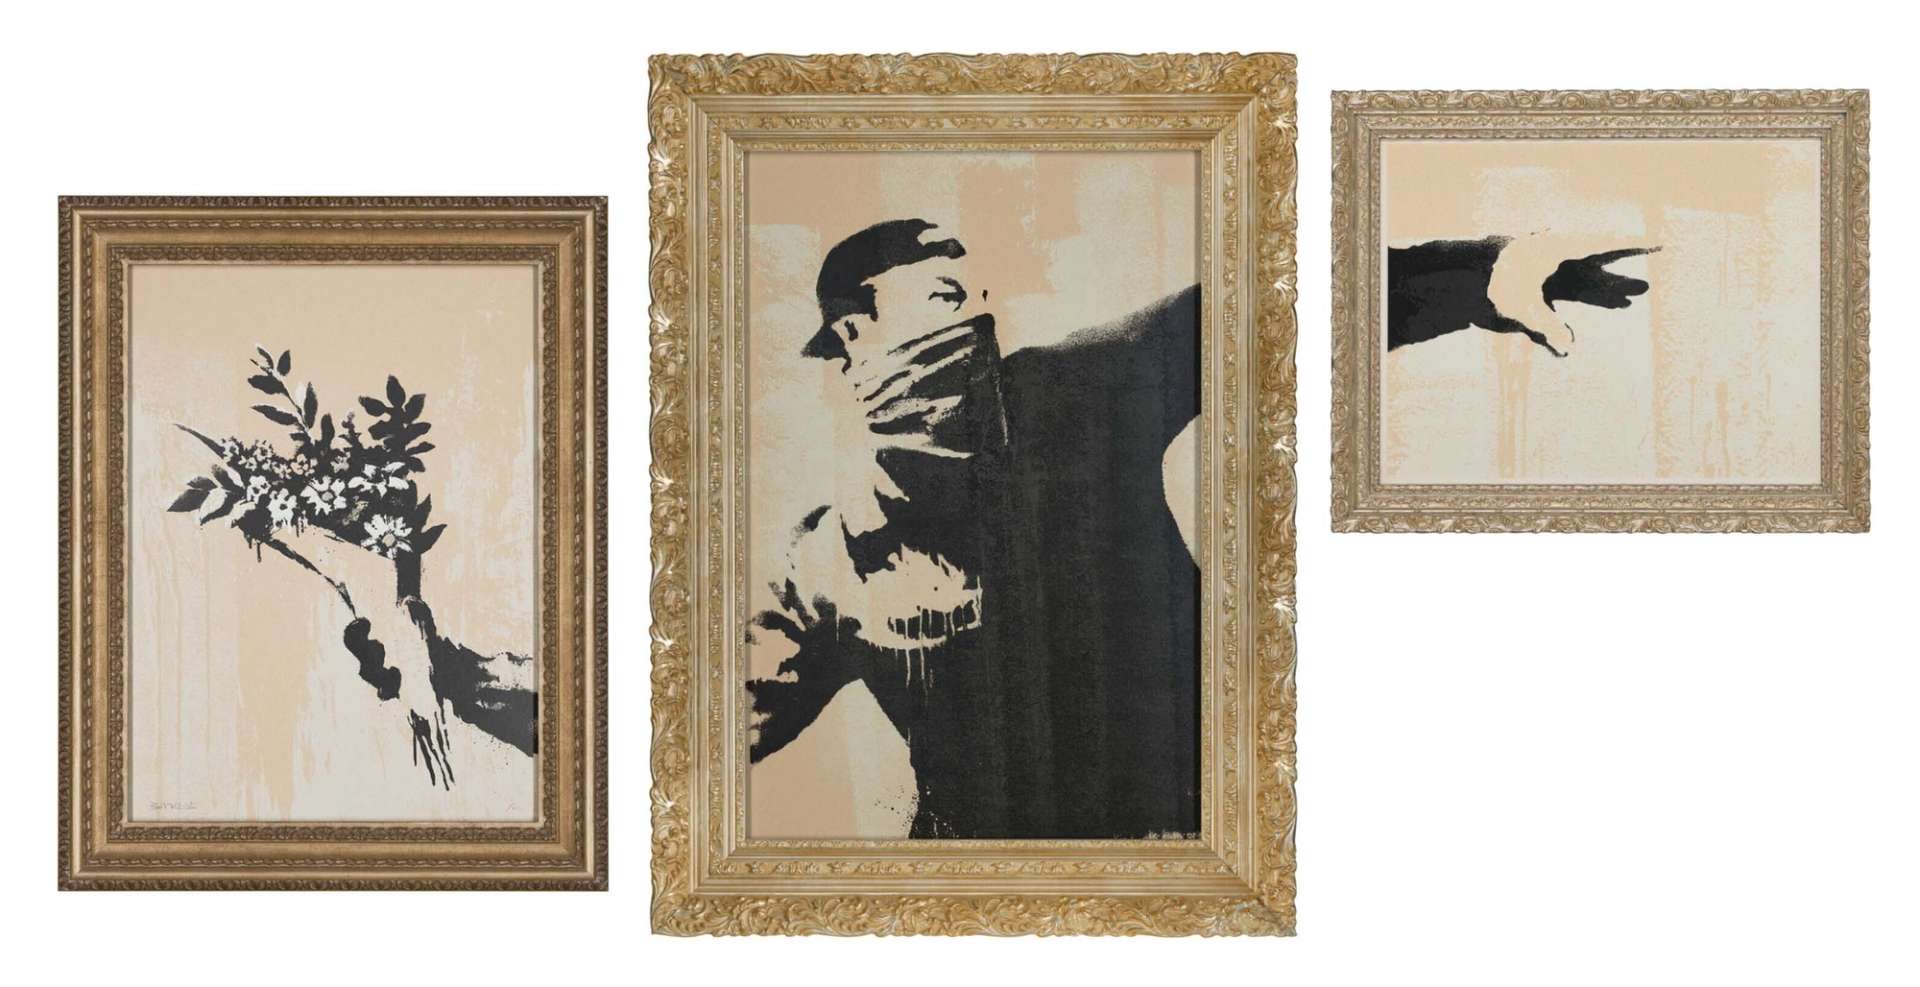 Banksy In Auction: Results & What We’ve Learned From Q1 2023